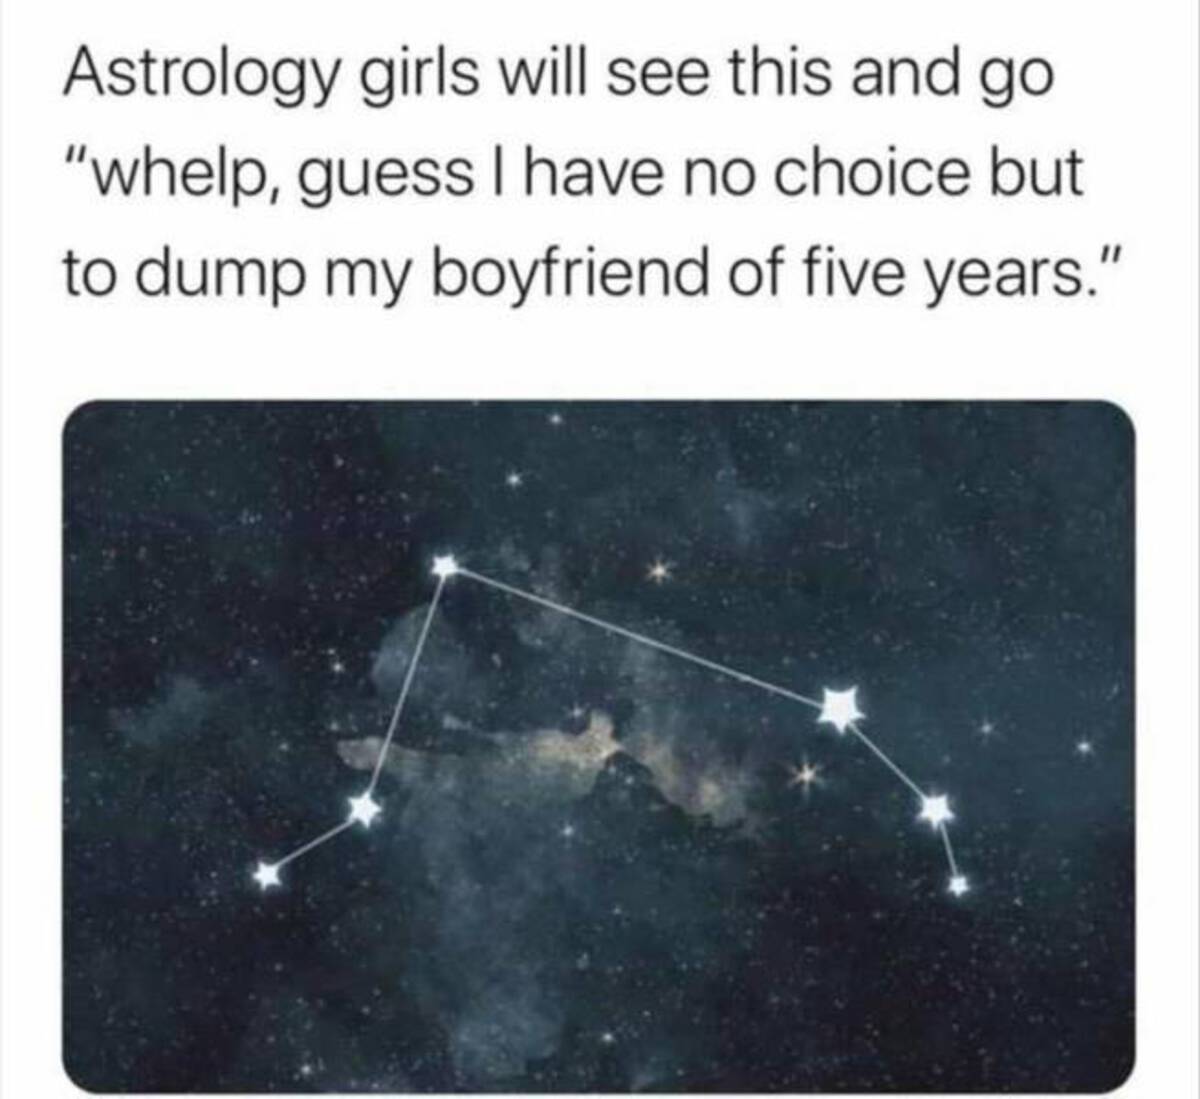 constellation - Astrology girls will see this and go "whelp, guess I have no choice but to dump my boyfriend of five years."